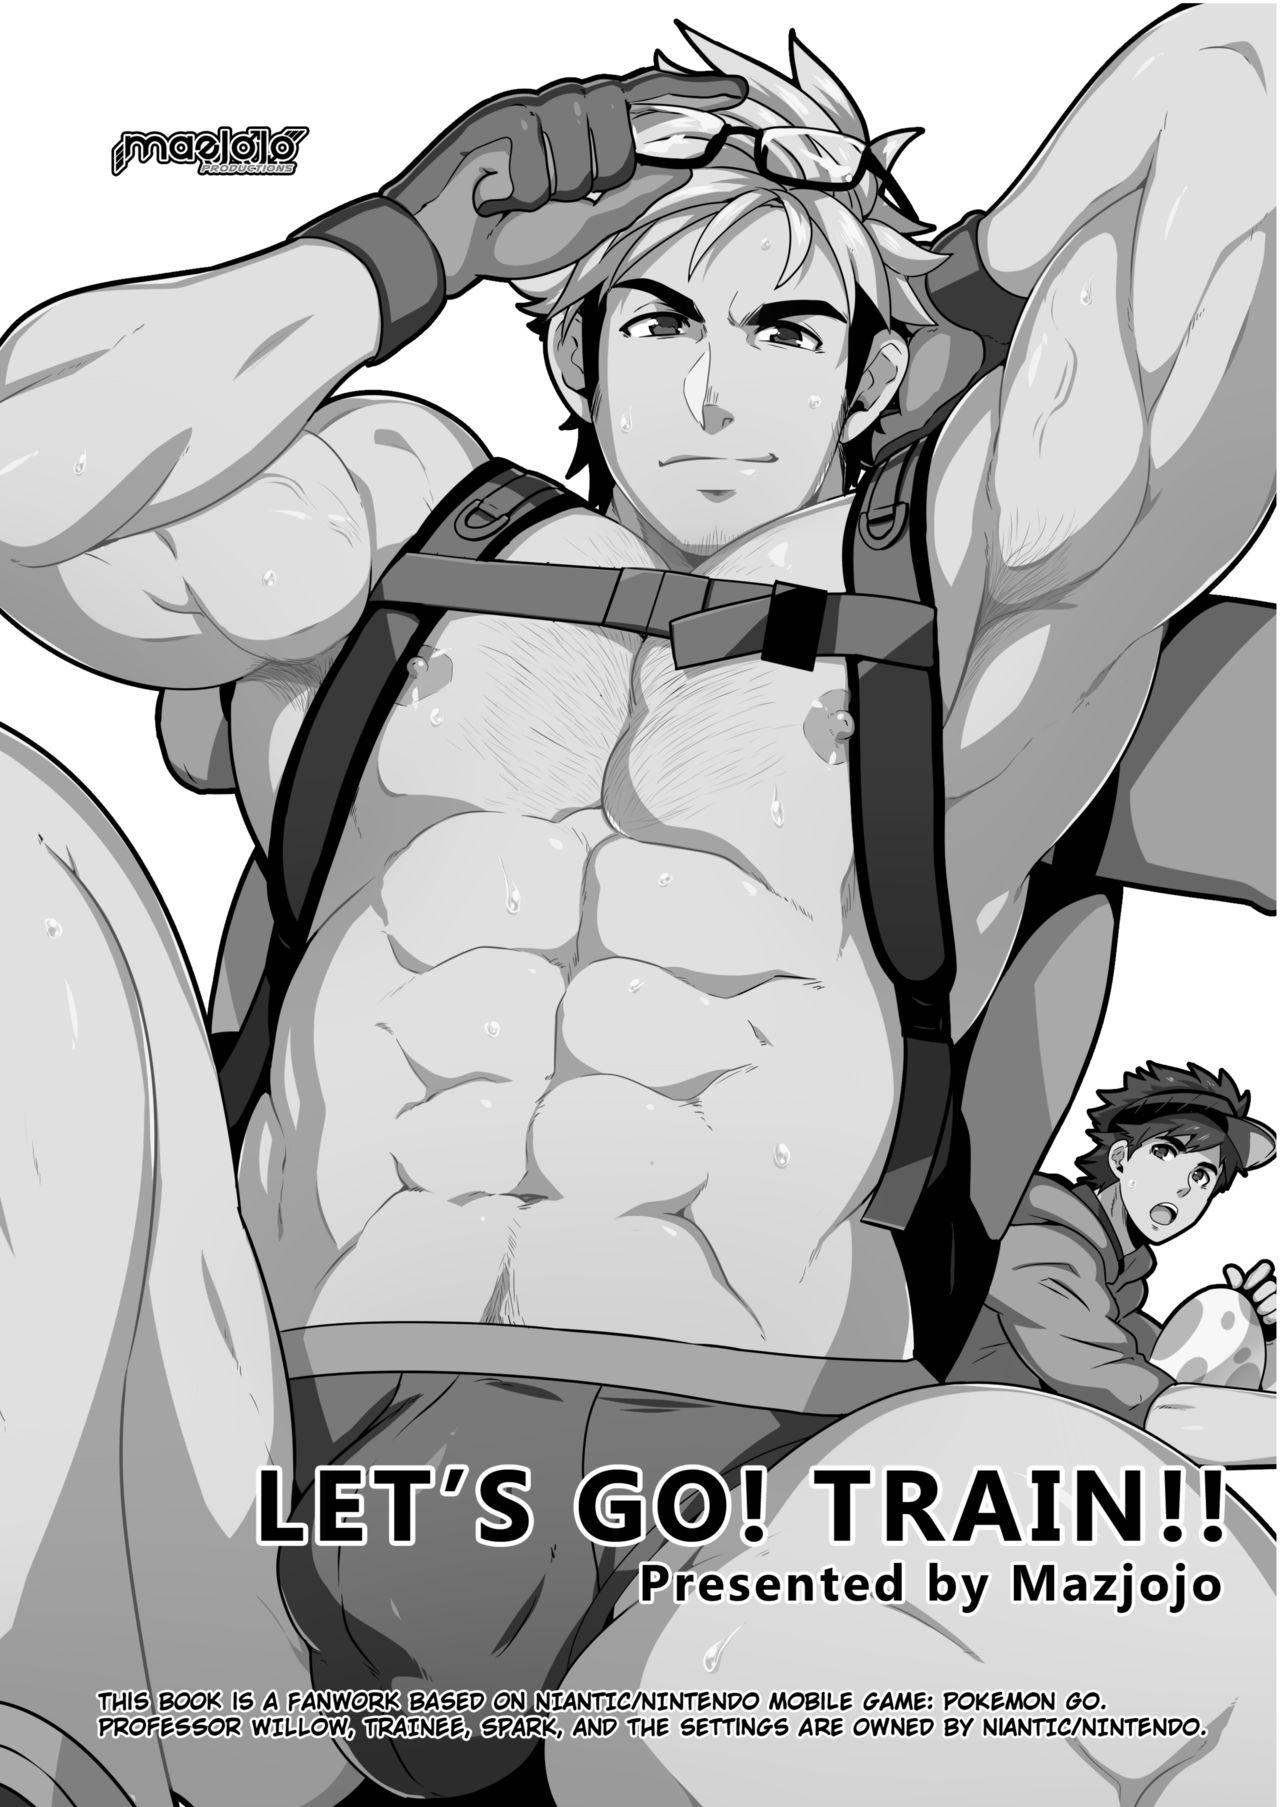 Small Let's GO! TRAIN!! - Pokemon Pounded - Page 2